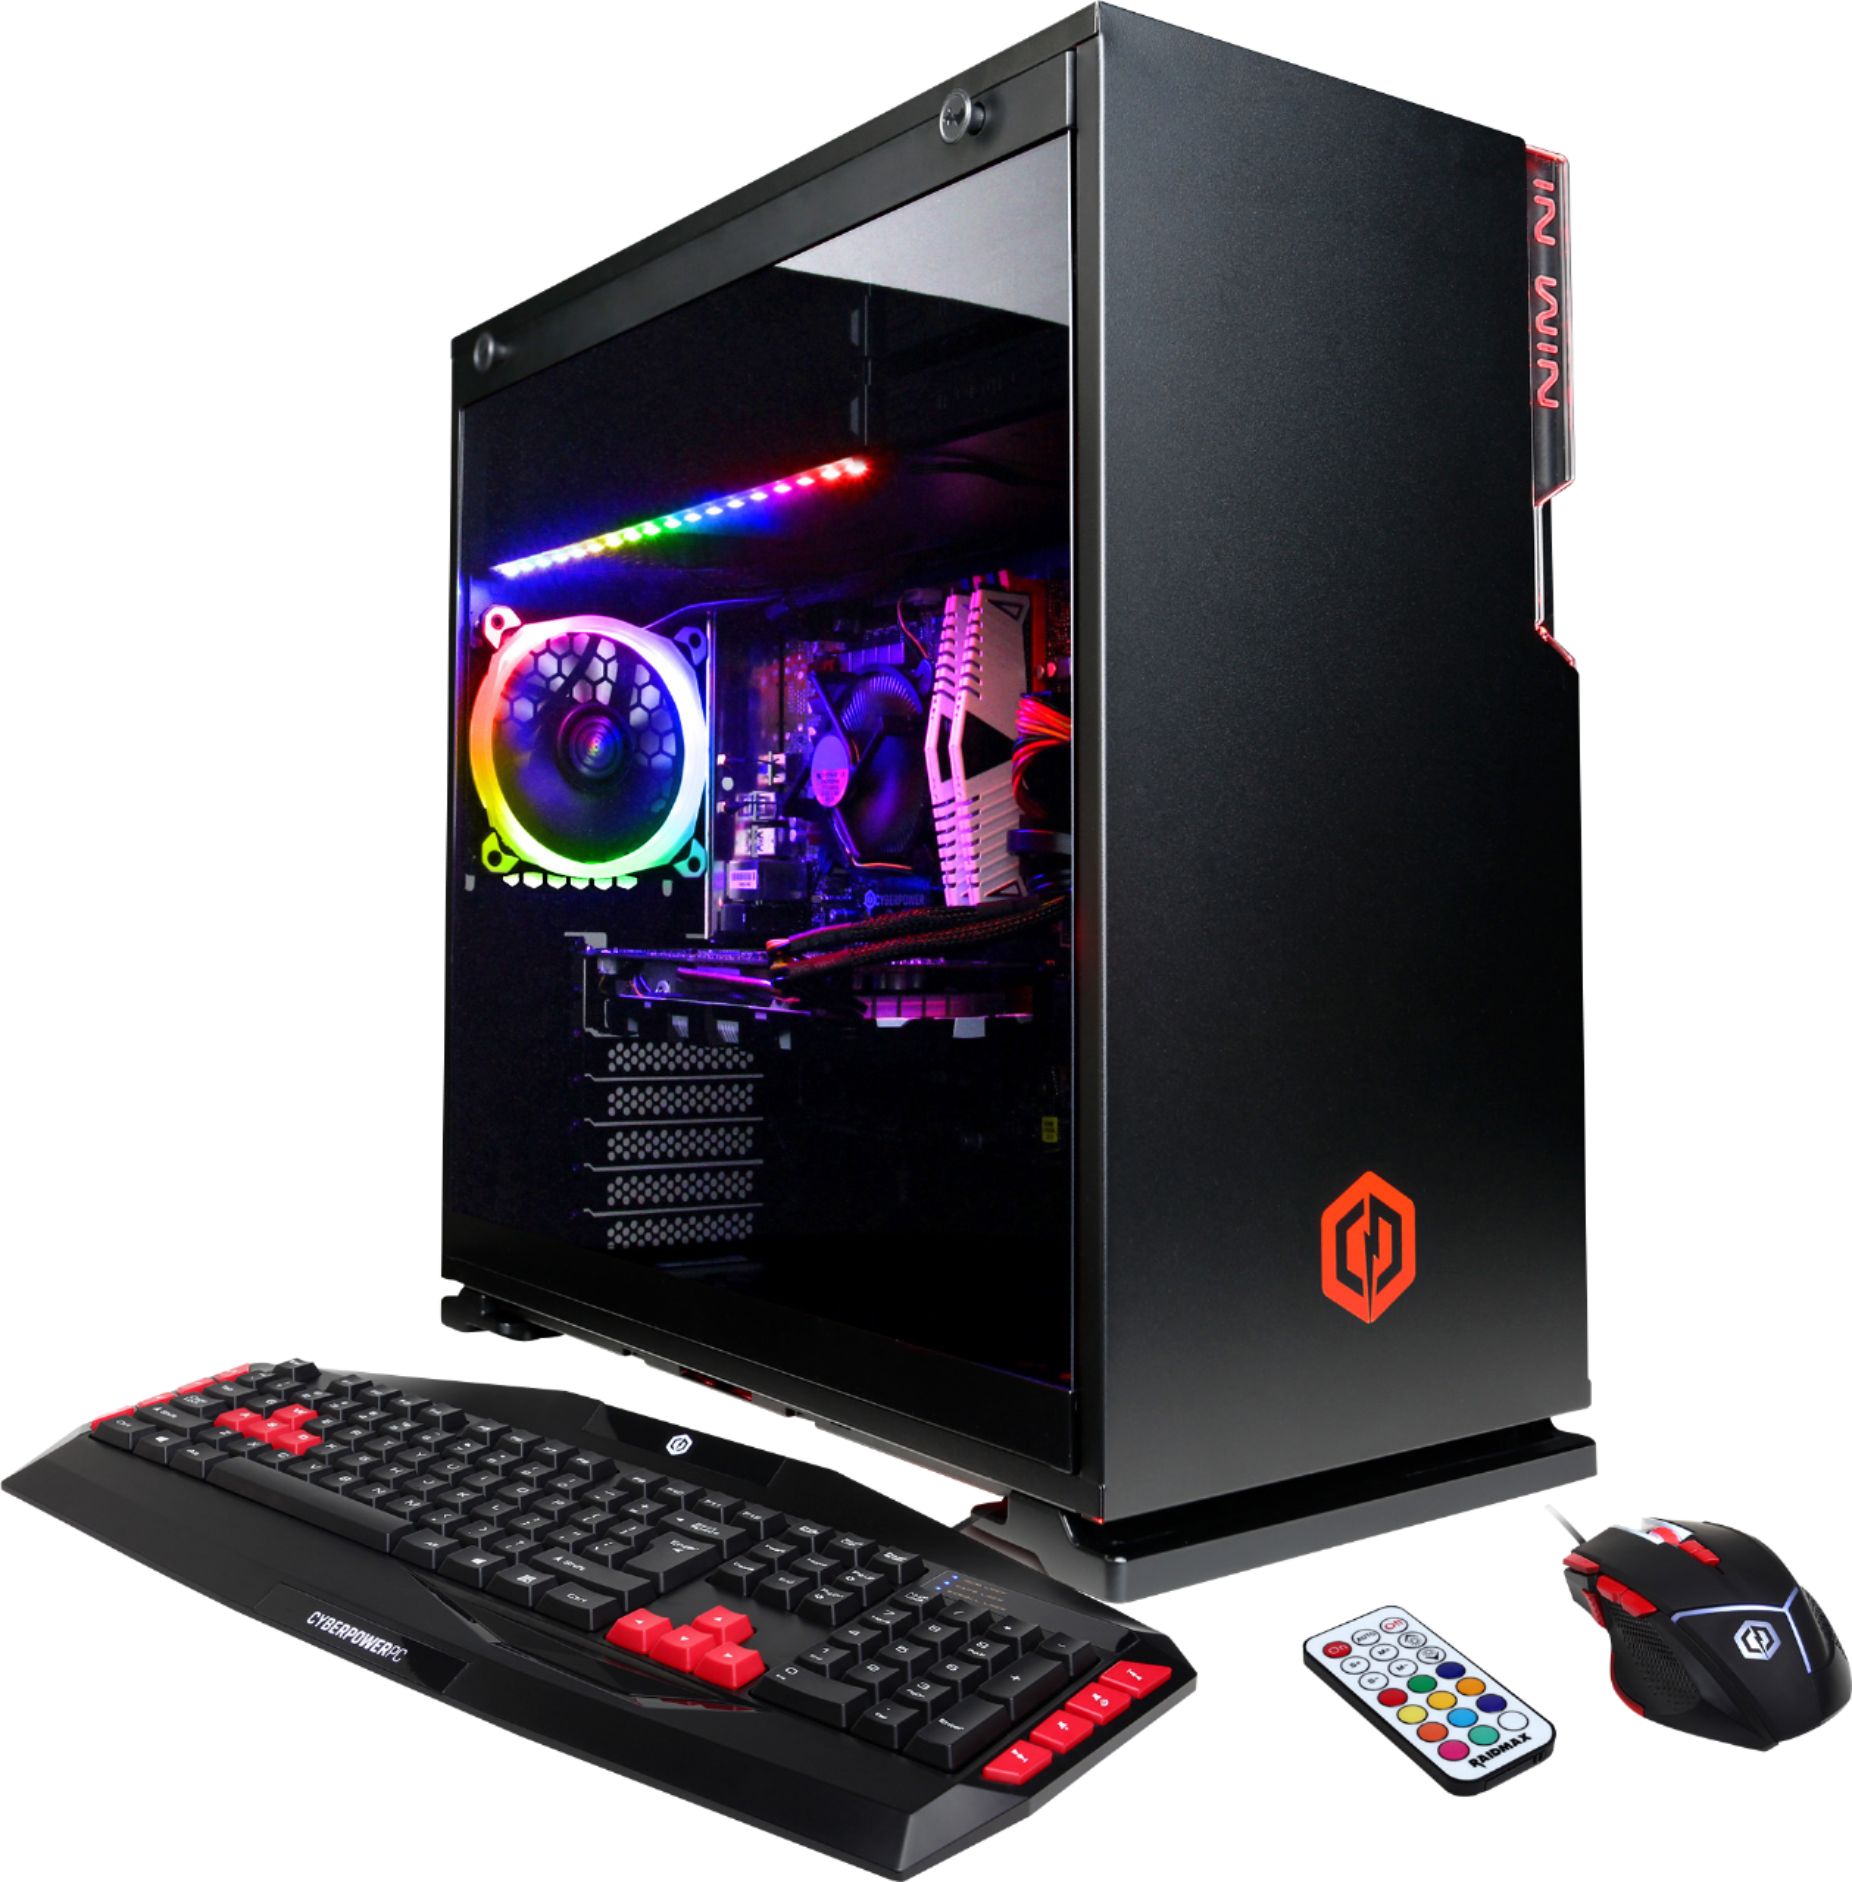 Ende Stolthed hykleri CyberPowerPC Gaming Desktop Intel Core i5 8GB Memory NVIDIA GeForce GTX  1060 240GB Solid State Drive + 2TB Hard Drive Black GXIVR2940OBST - Best Buy